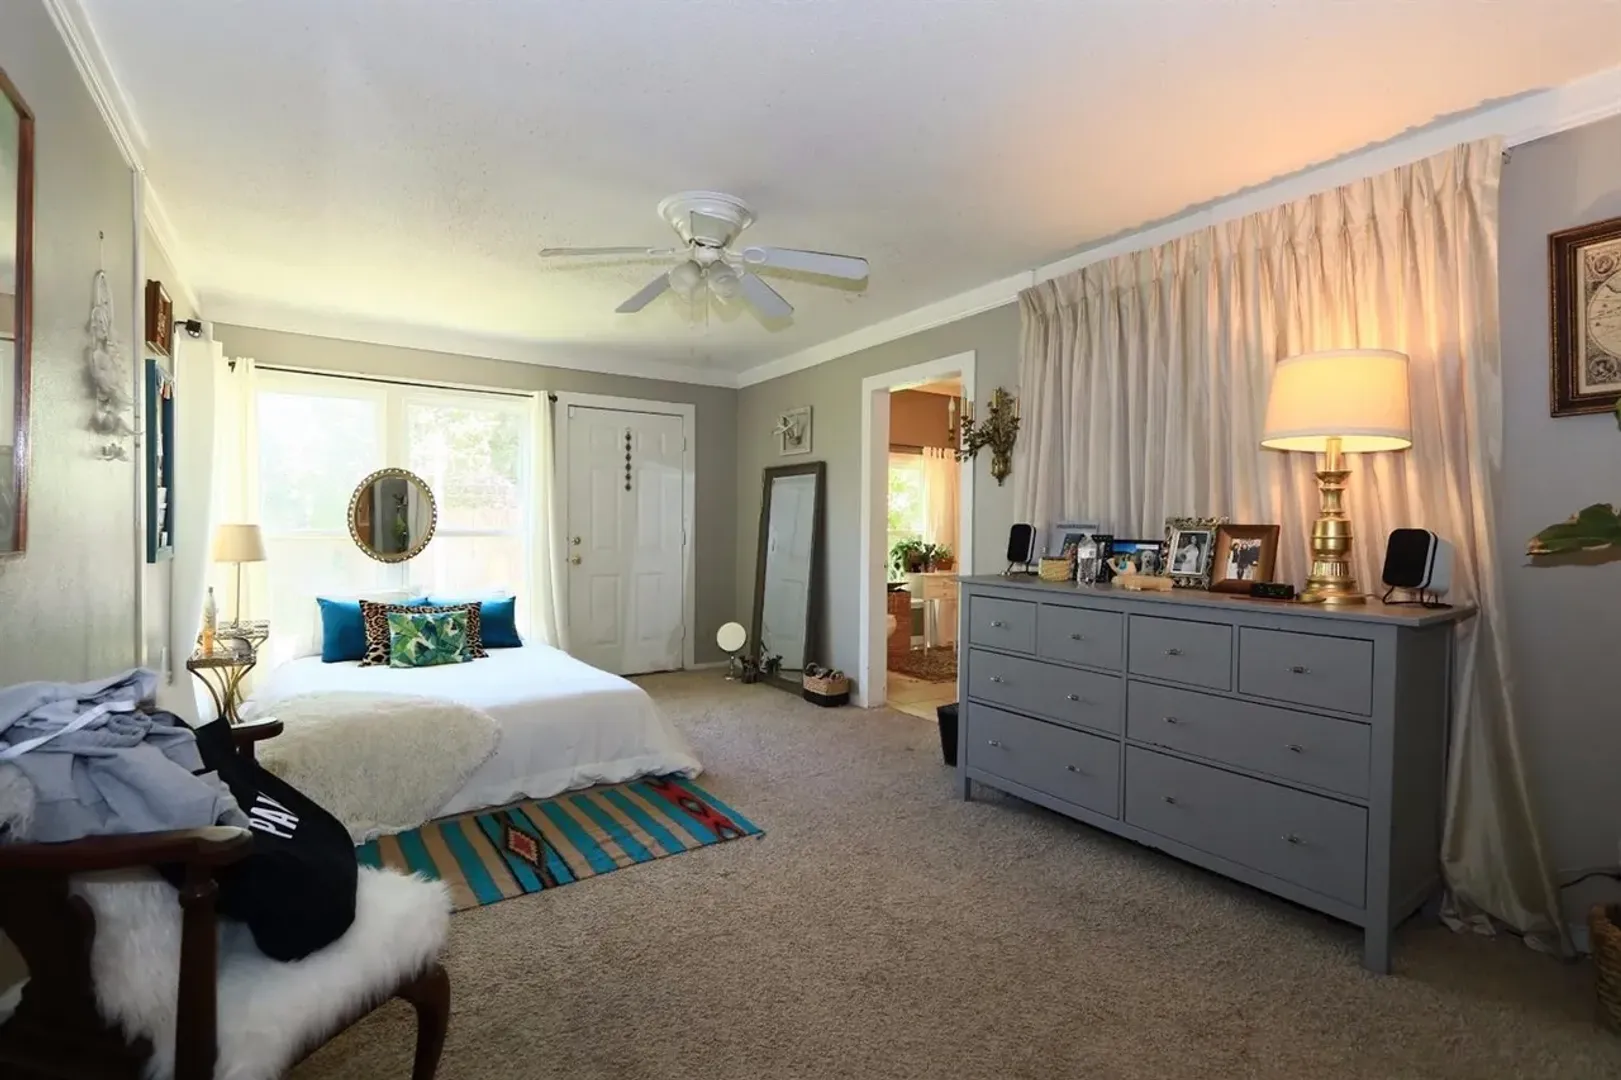 Pre-leasing for Fall! Cute 3/2 In Tech Terrace With Washer & Dryer!